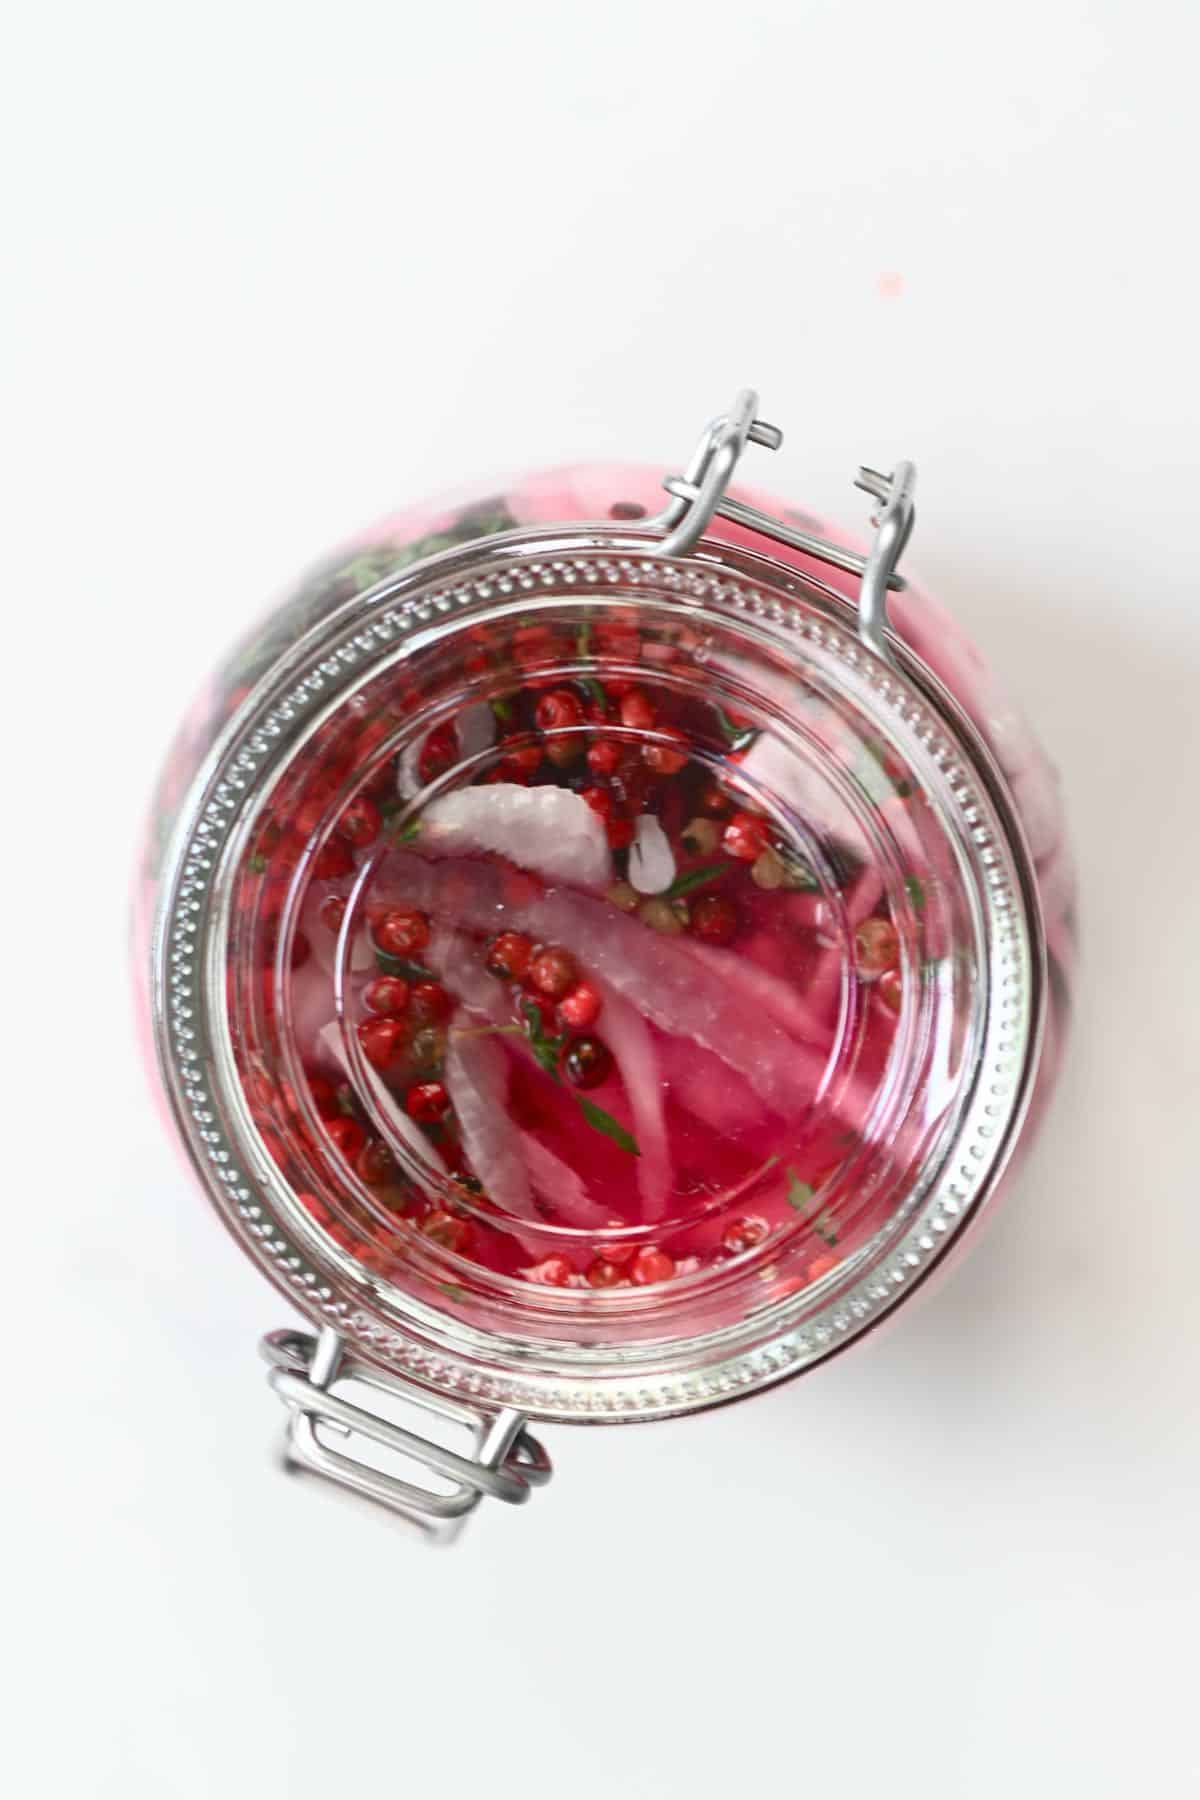 Top view of closed jar with pickled onions